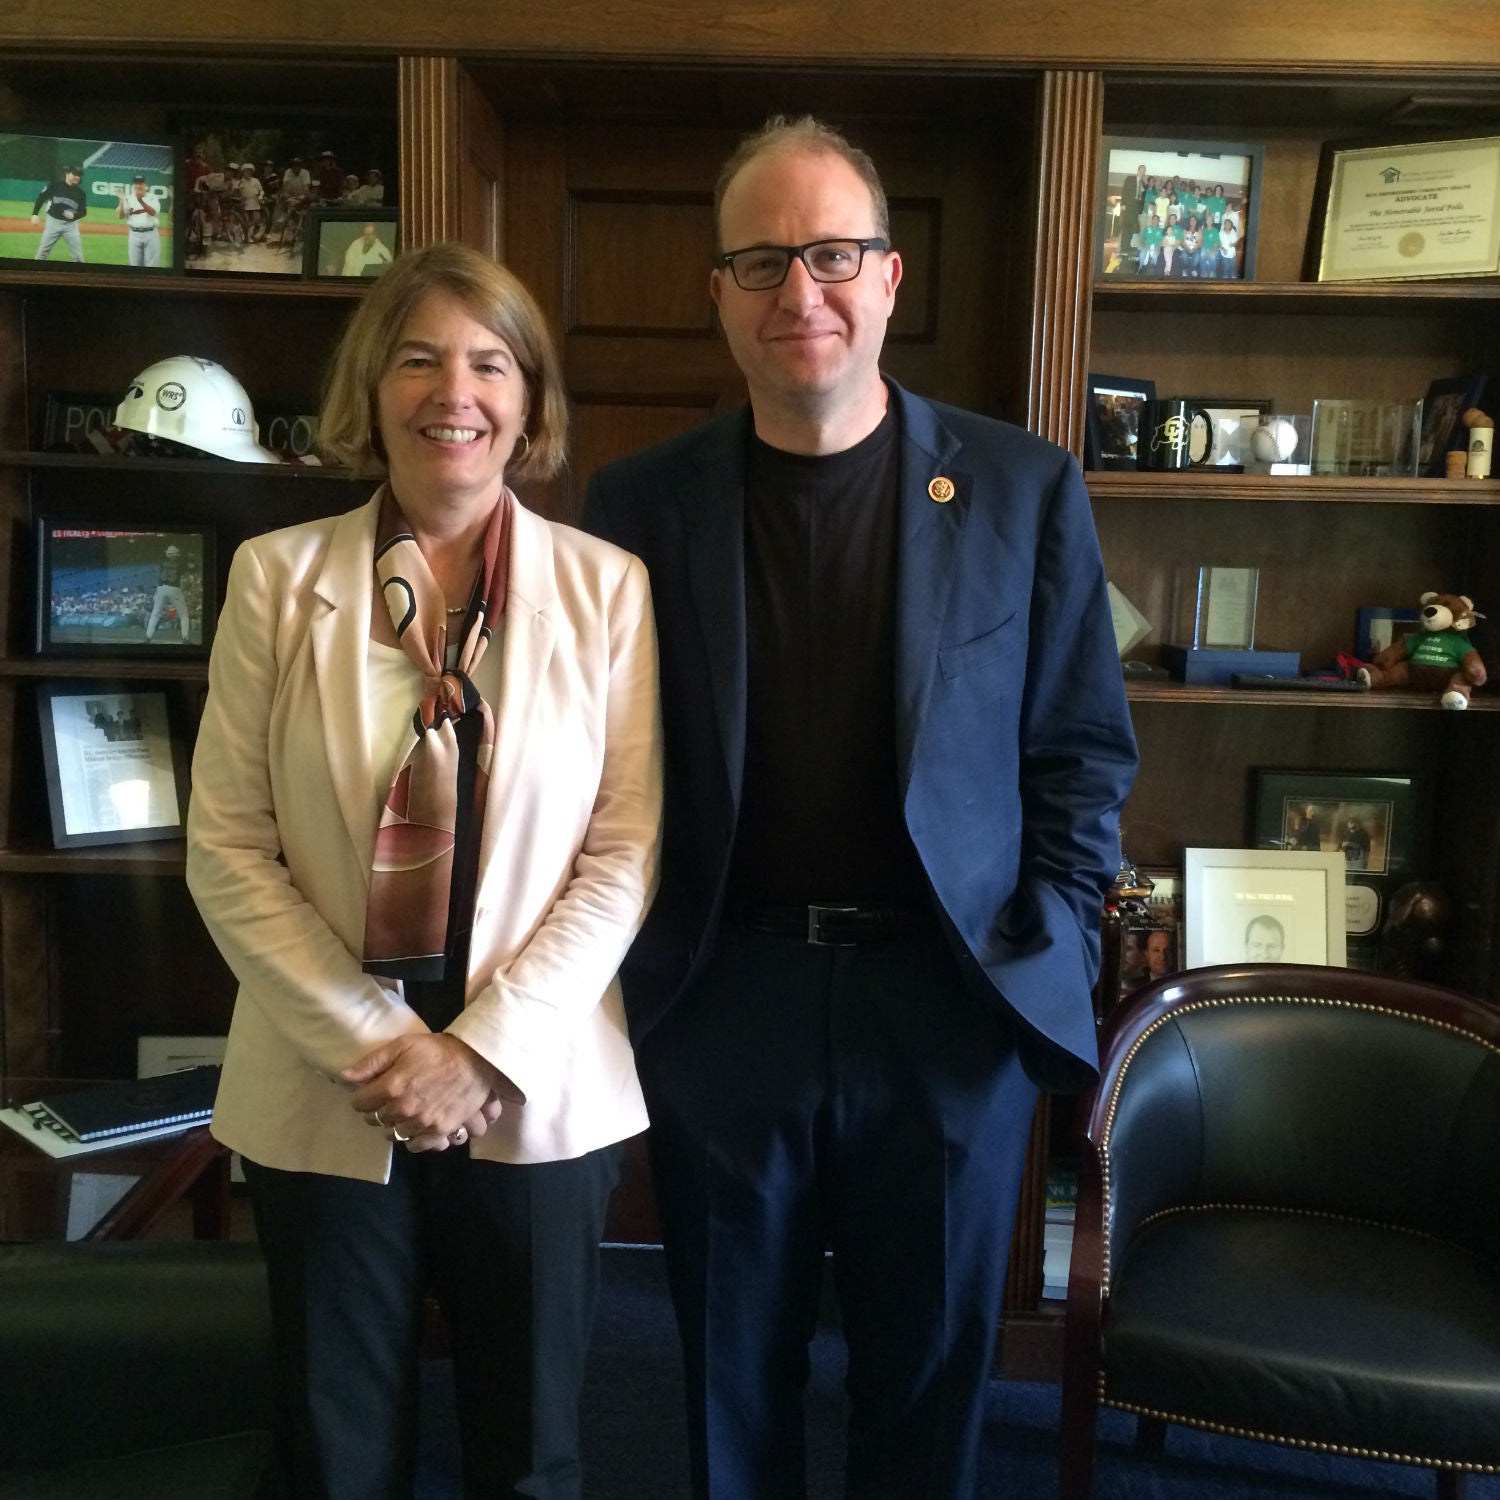 Dr. Marie Banich with Congressman Jared Polis in D.C.